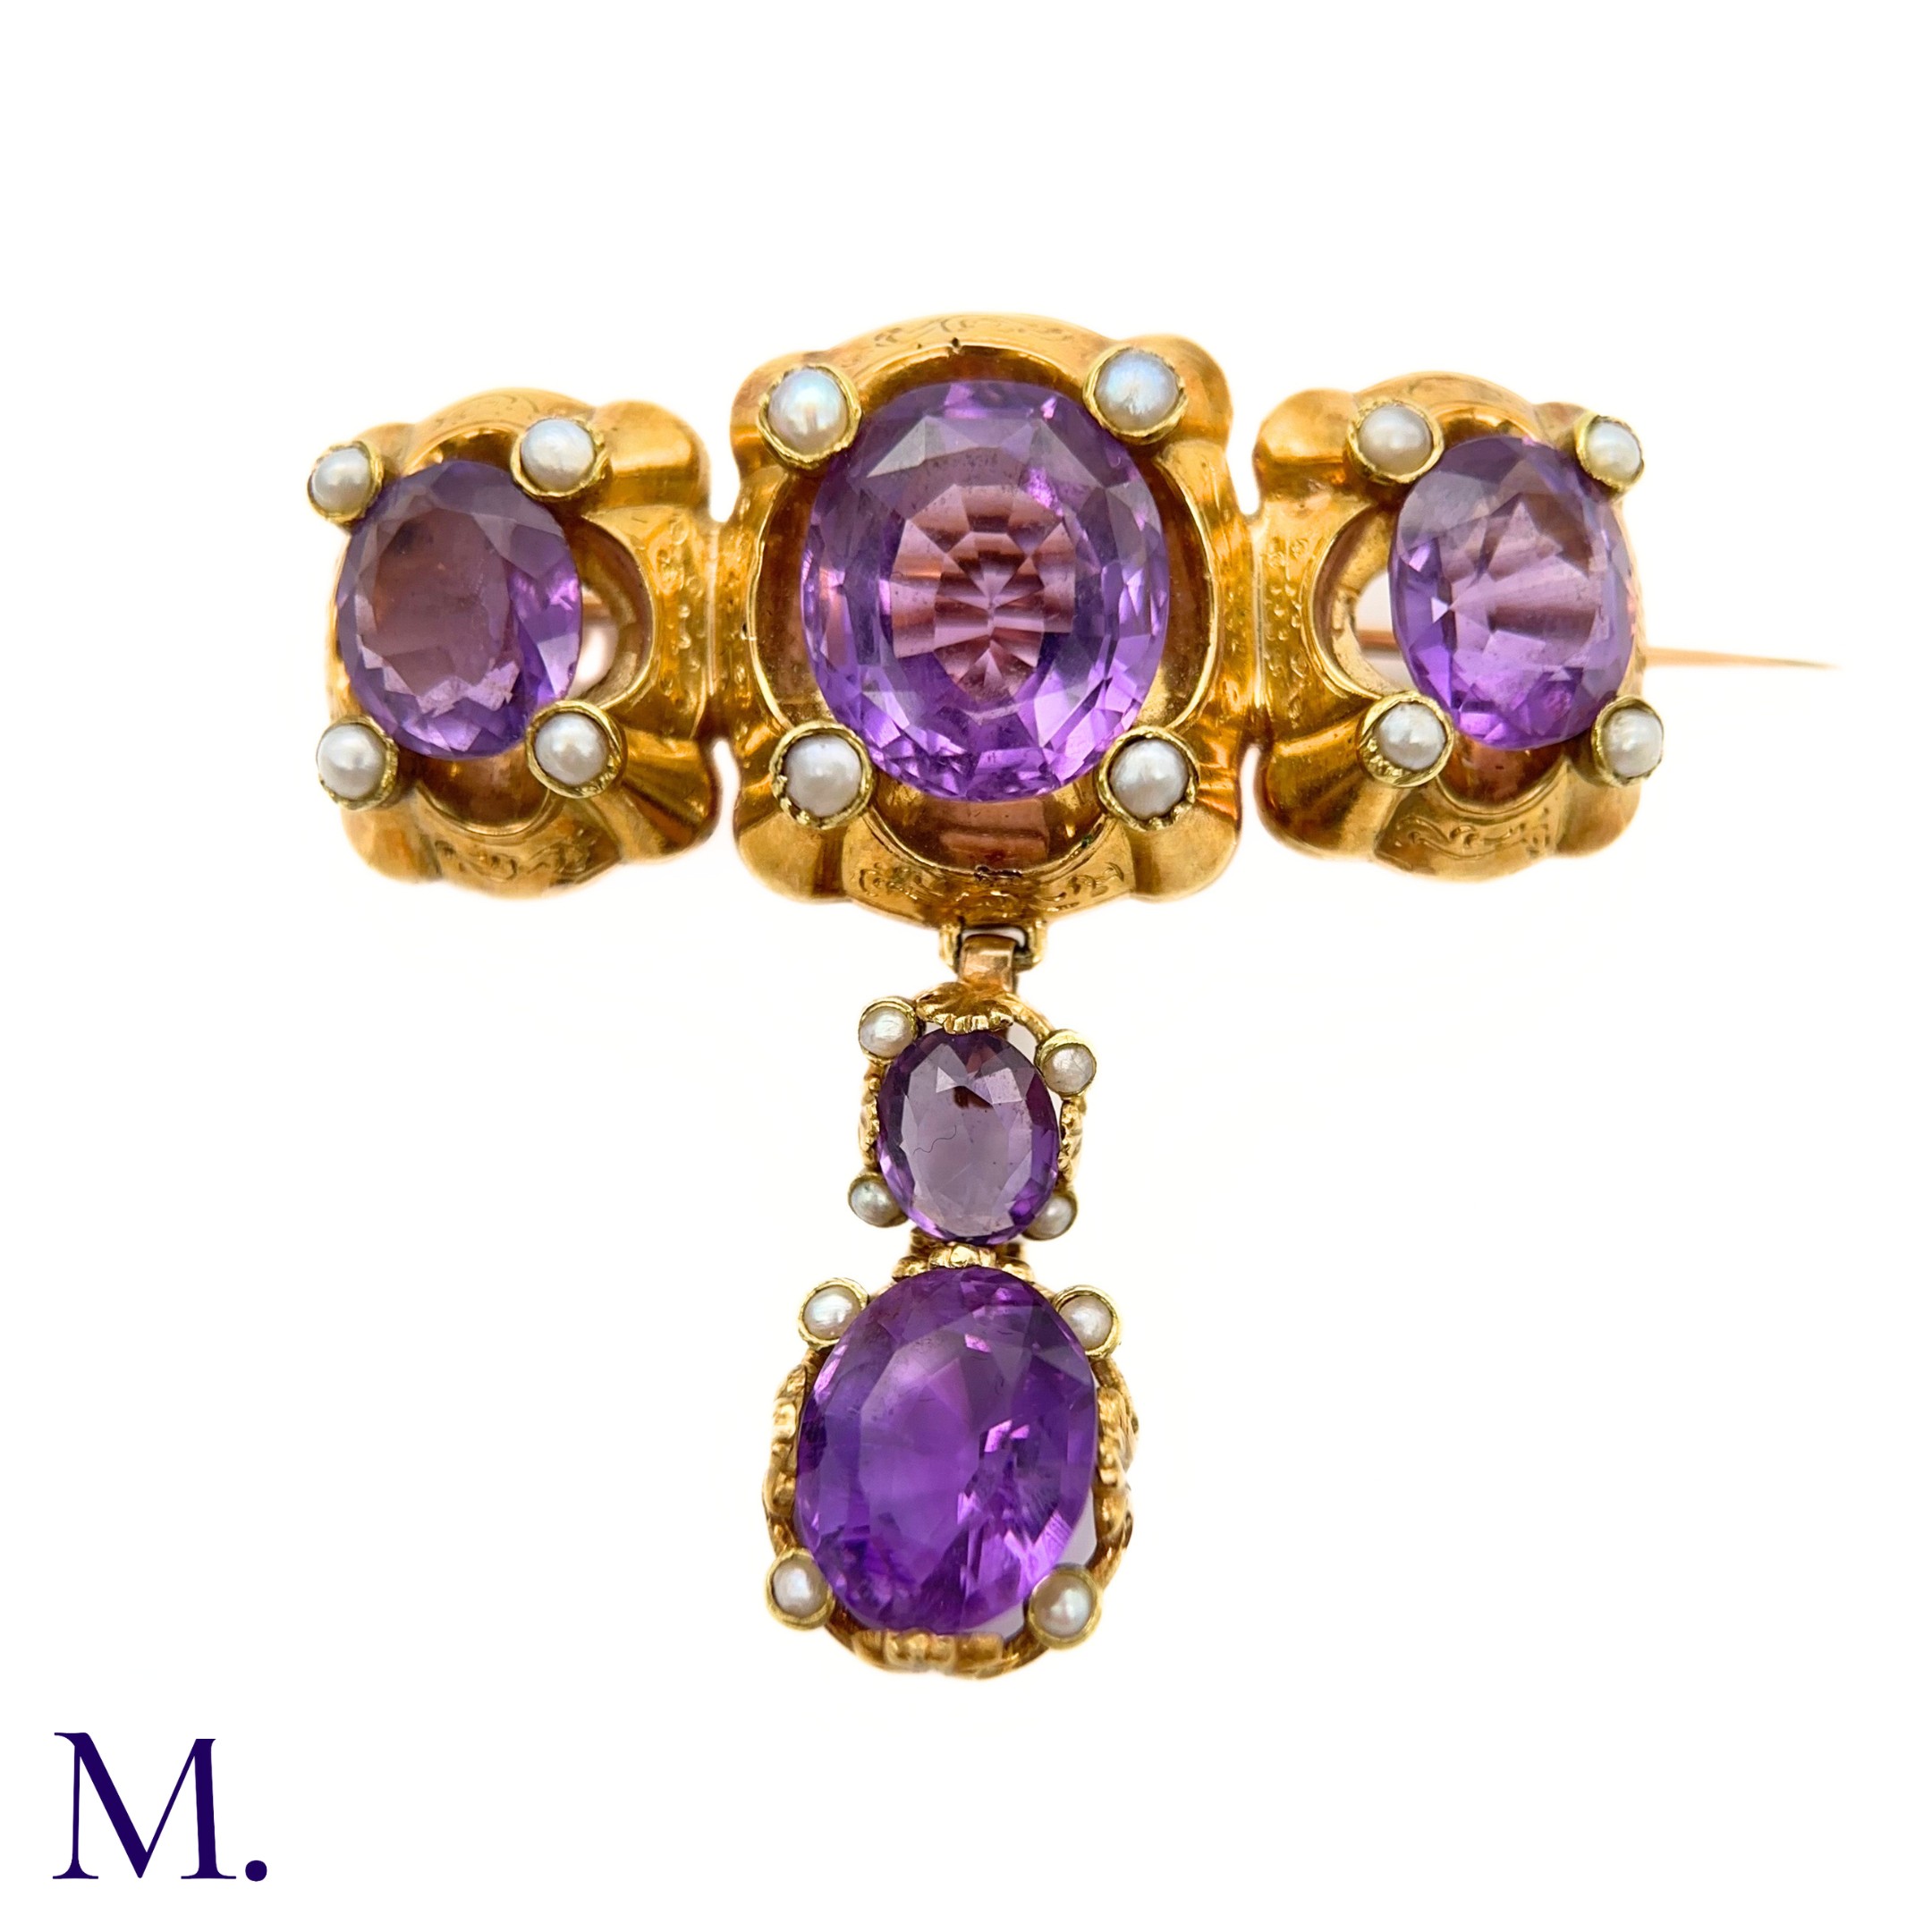 An Antique Amethyst and Pearl Drop Brooch - Image 2 of 6